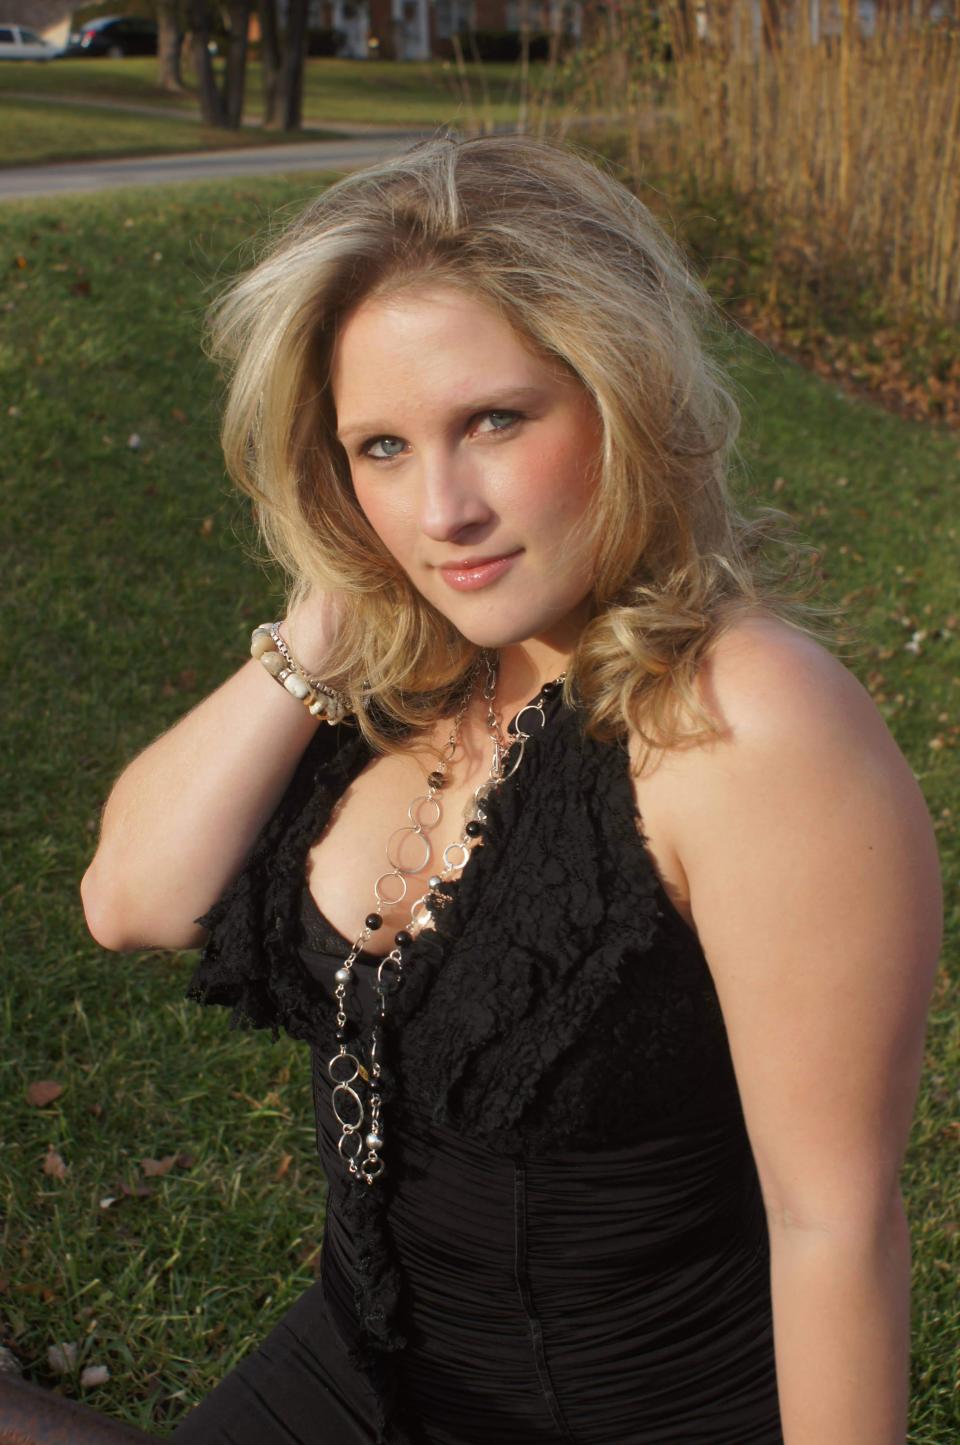 Dawn Savage will entertain at the latest Beaver County Maple Syrup Festival.
(Photo: Submitted)